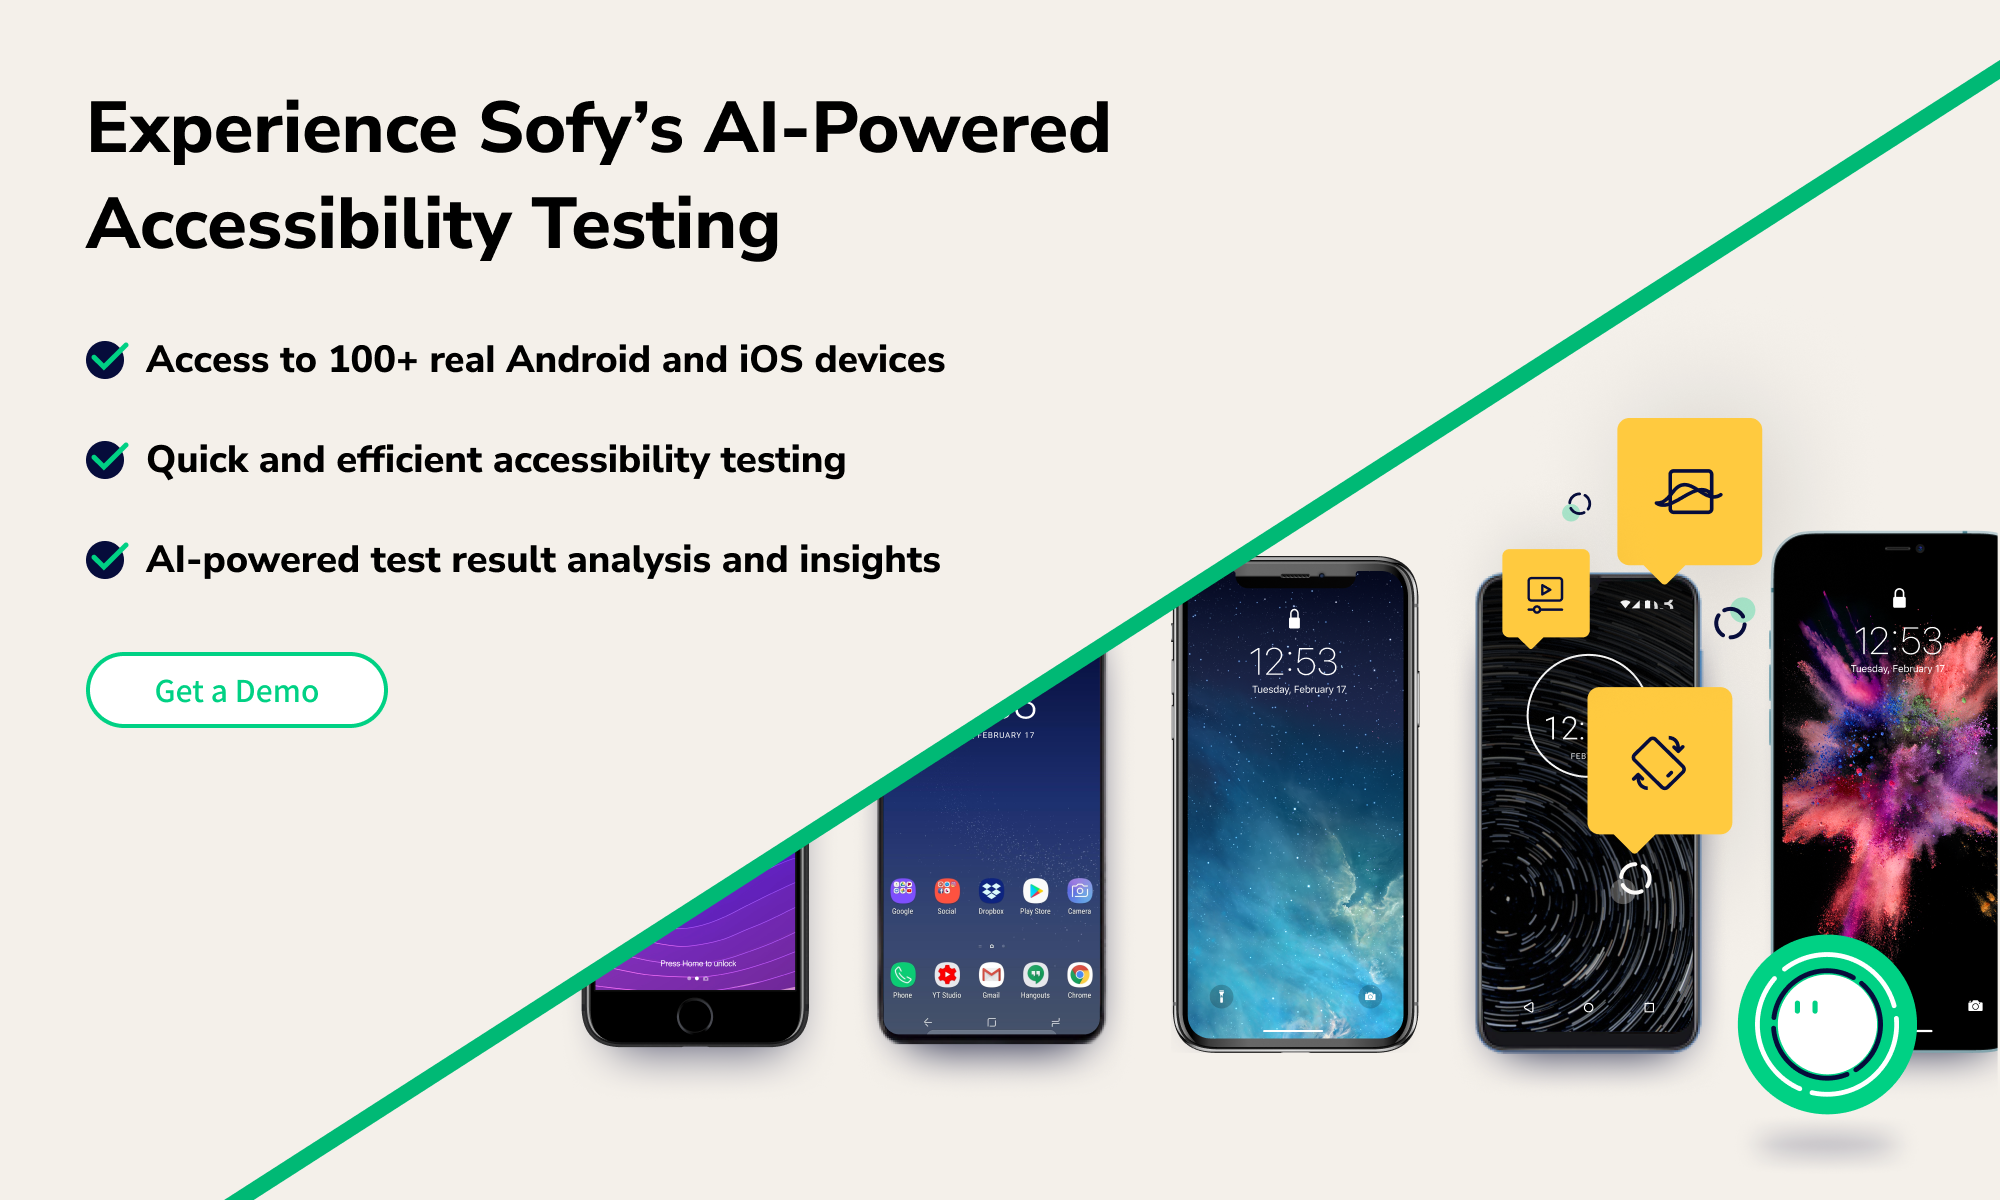 Experience Sofy's AI-Powered Accessibility Testing